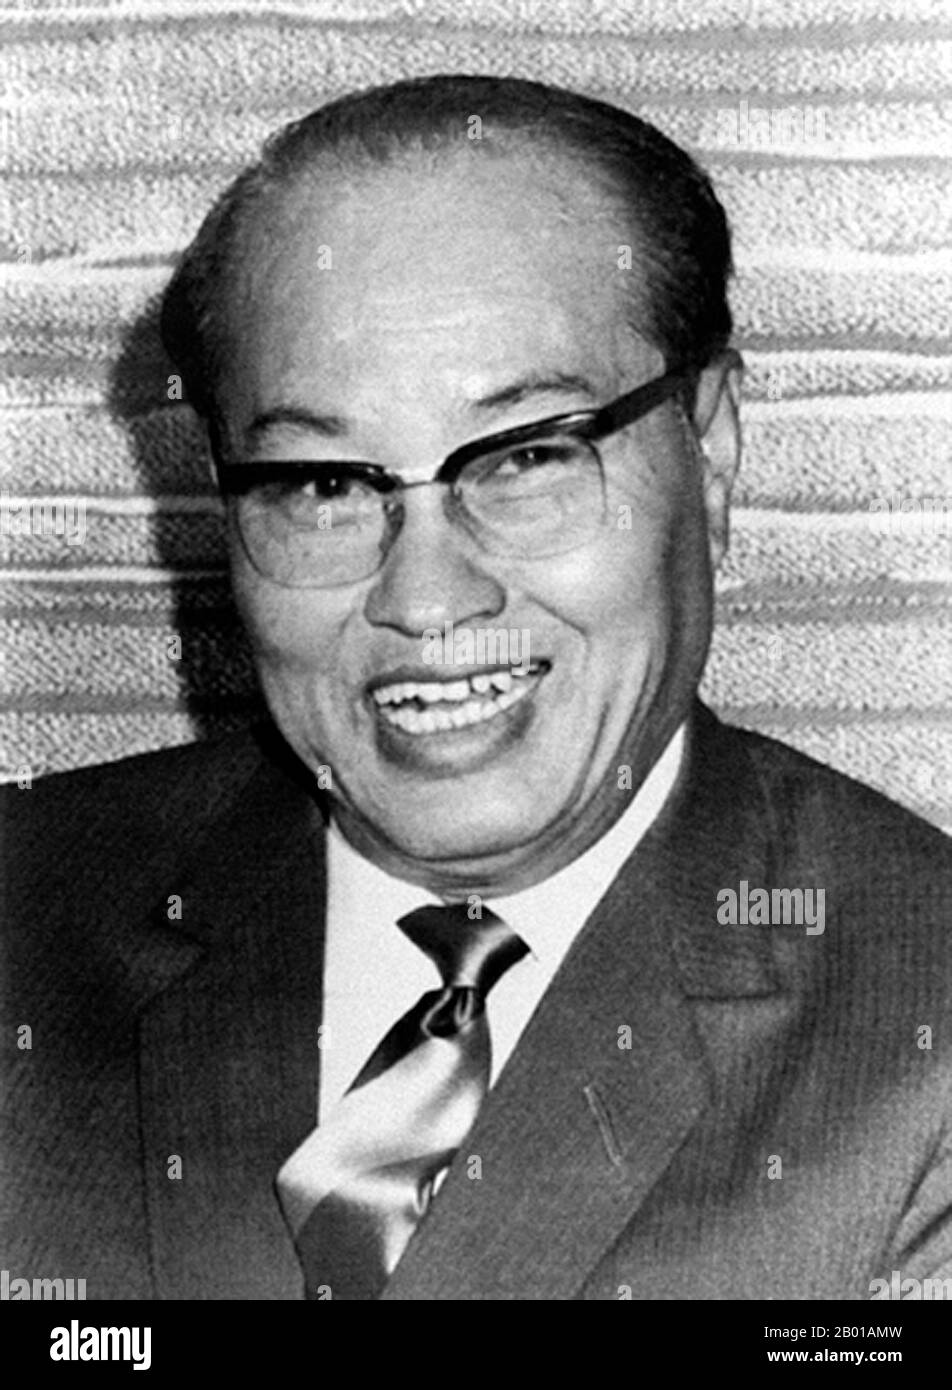 Burma/Myanmar: Ne Win (c. 1910-2002), Prime Minister of Burma from 1958 to 1960 and 1962 to 1974 and also head of state from 1962 to 1981.  Ne Win (born on 24 May or 14 May 1911 or 10 July 1910 – 5 December 2002) was a politician and military commander. He was Prime Minister of Burma from 1958 to 1960 and 1962 to 1974 and also head of state from 1962 to 1981. He also was the founder and from 1963 to 1988 the chairman of the Burma Socialist Programme Party, which from 1964 until 1988 was the sole political party in the Burmese nation state. Stock Photo